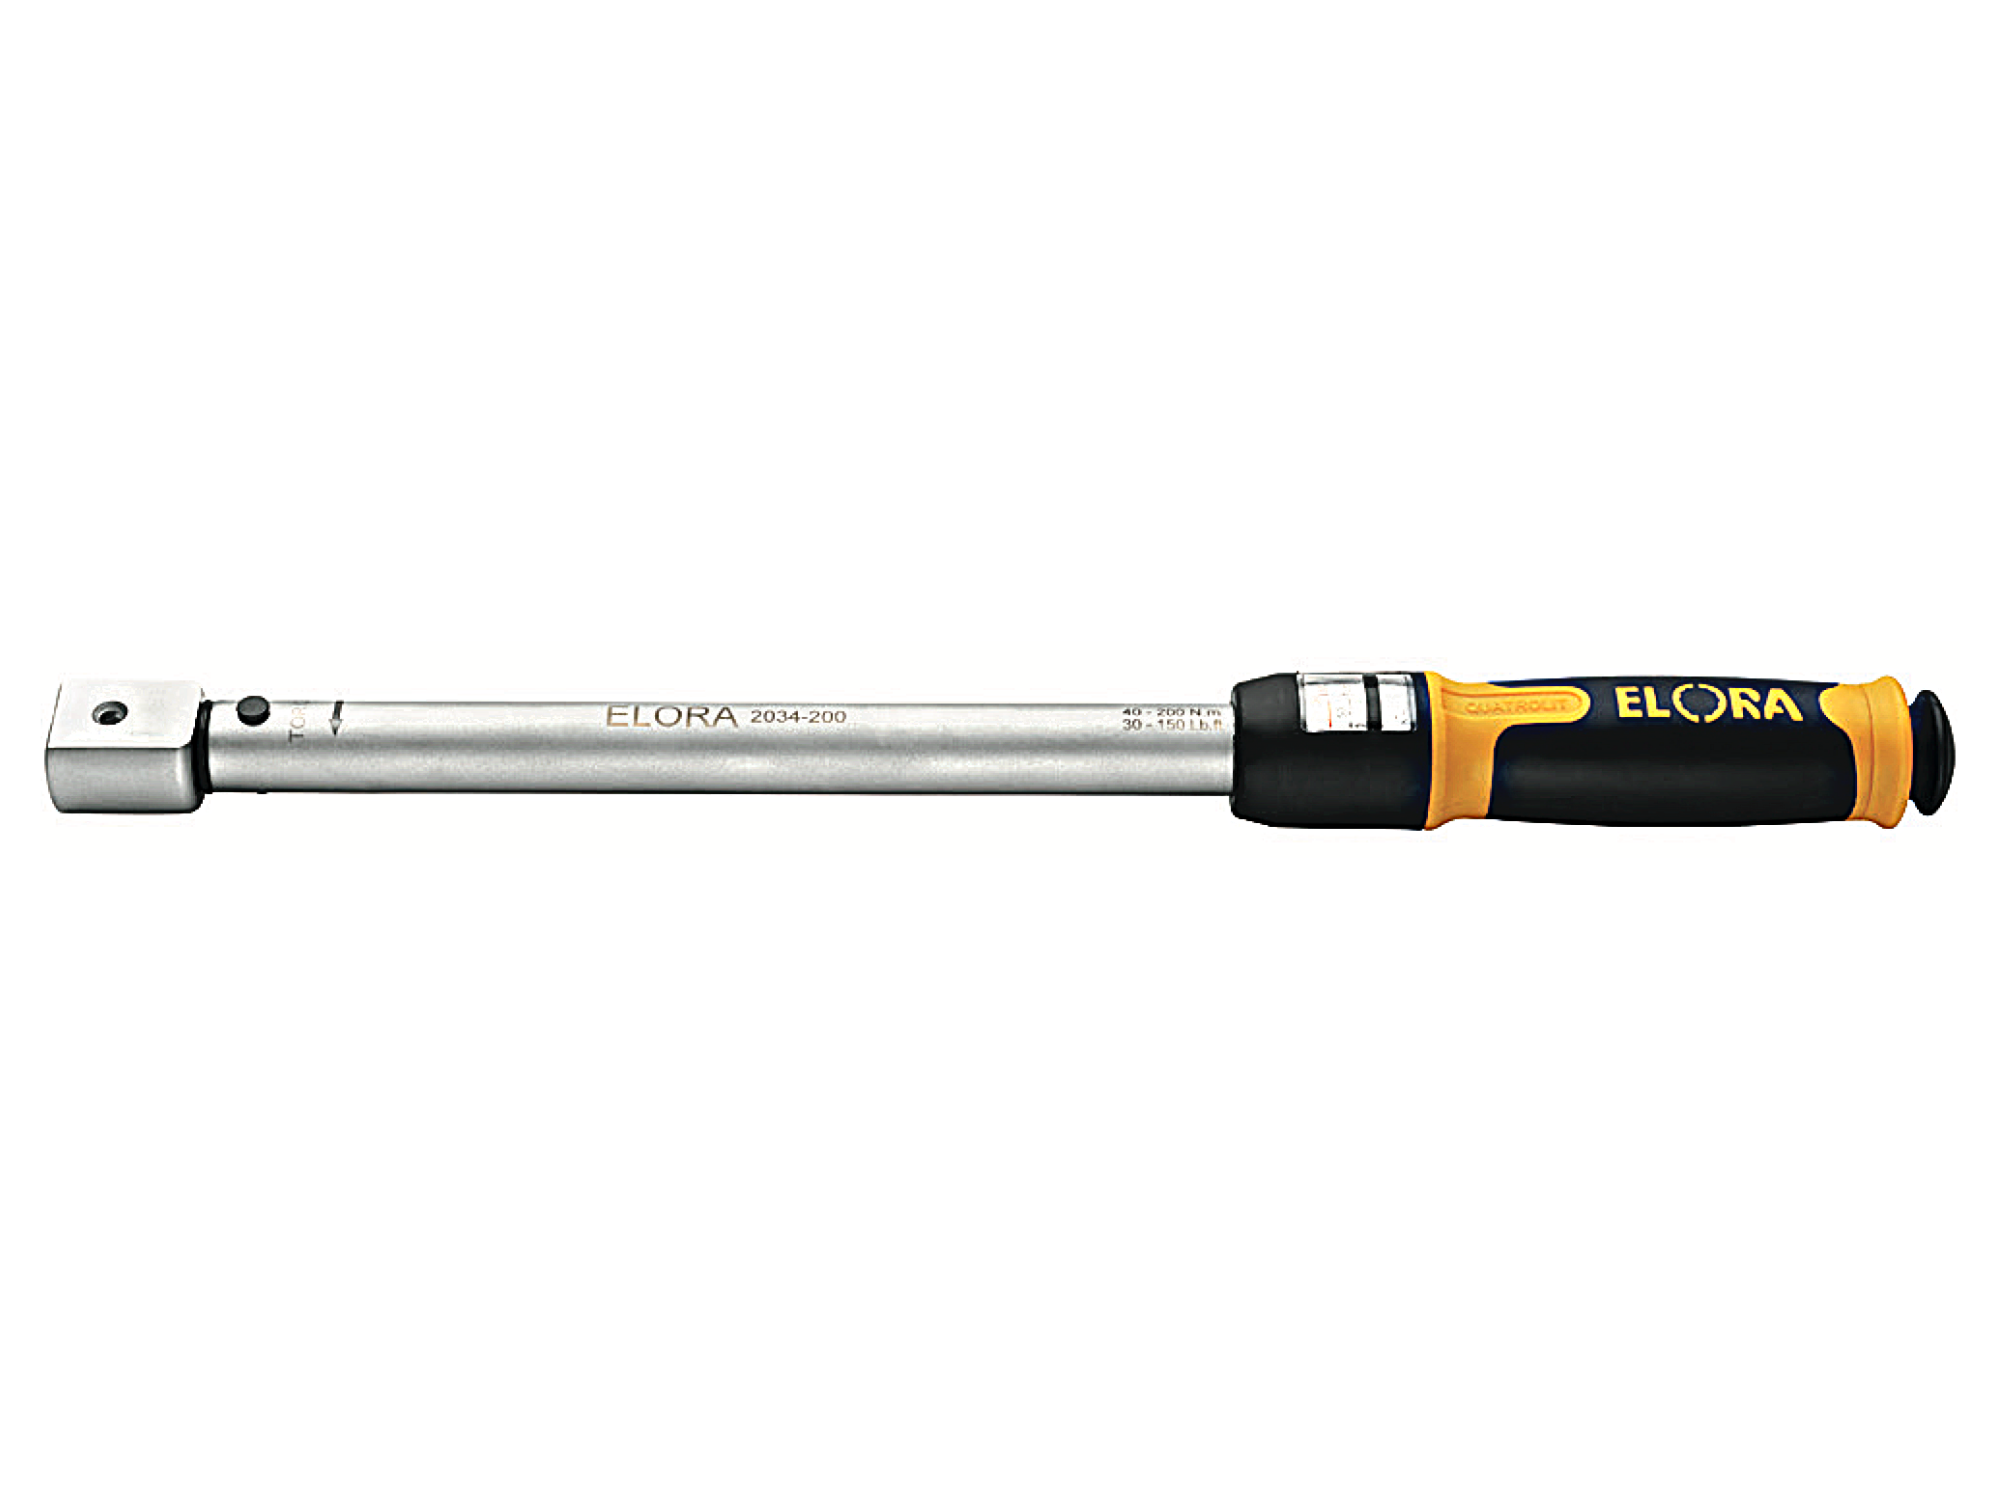 ELORA 2034-200/335 14x18mm Torque Wrench With Rectangular Intake - Premium Torque Wrench from ELORA - Shop now at Yew Aik.